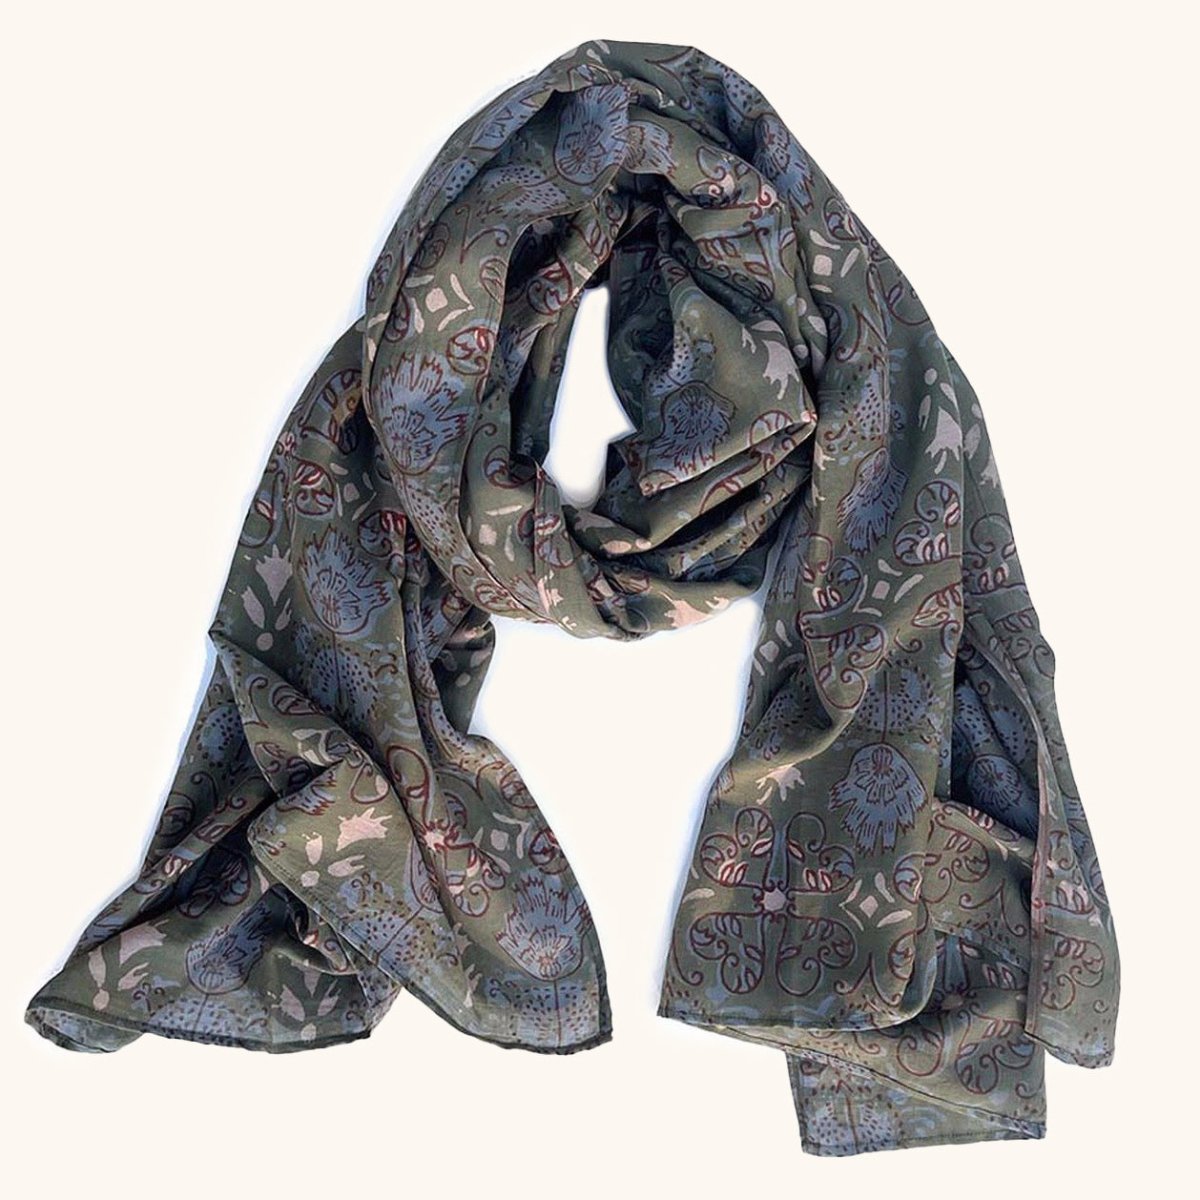 Green, blue, and ivory block printed scarf in a floral pattern. Designed by Ichcha and handmade in India.